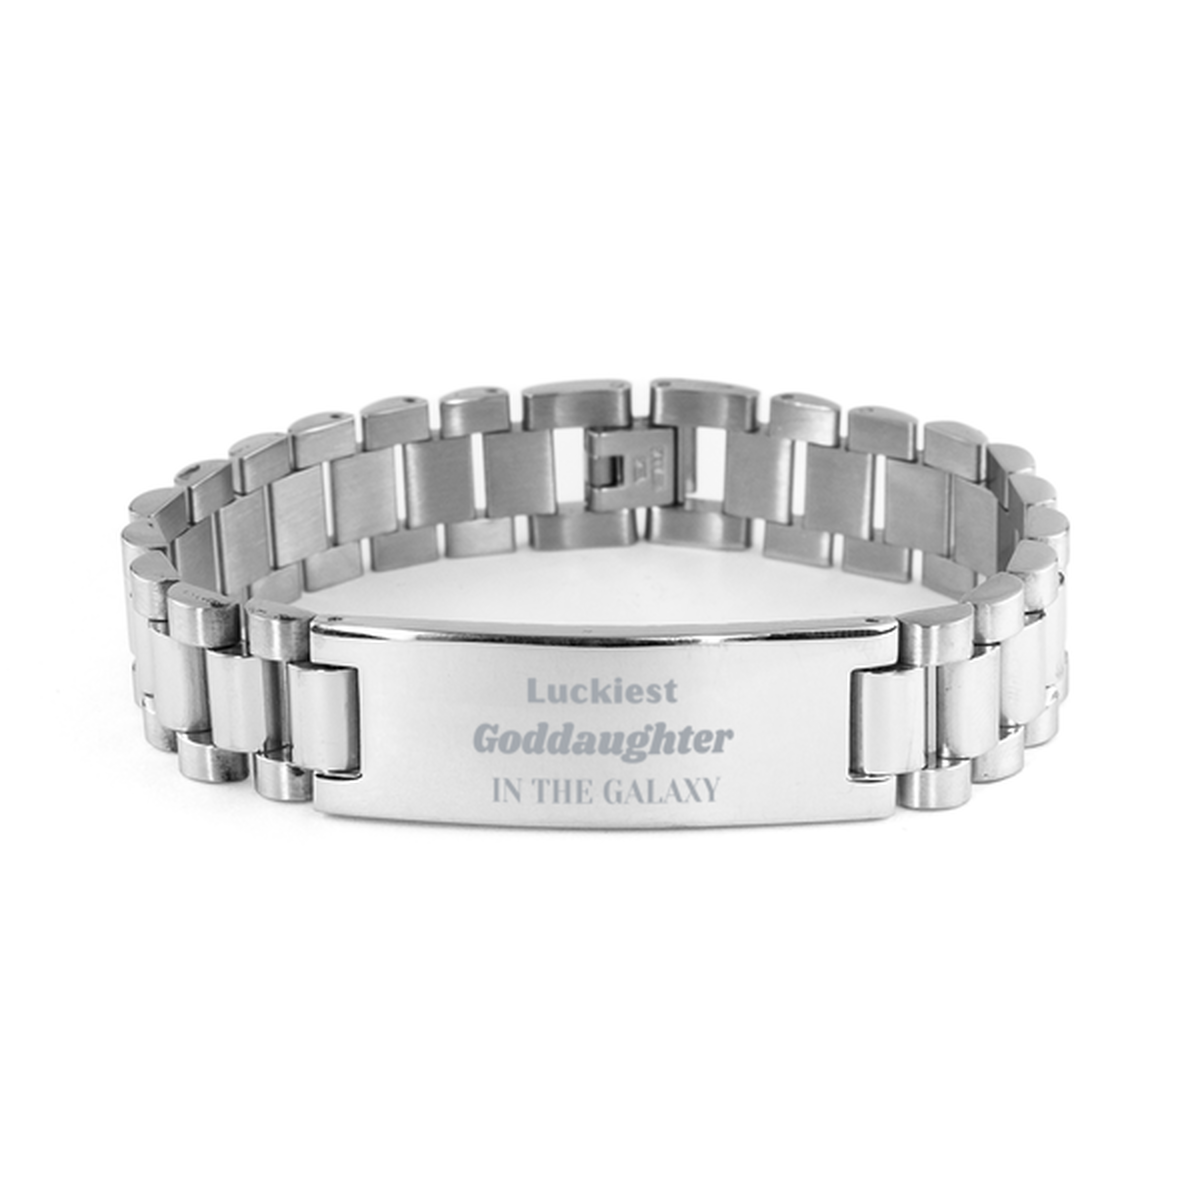 Luckiest Goddaughter in the Galaxy, To My Goddaughter Engraved Gifts, Christmas Goddaughter Ladder Stainless Steel Bracelet Gifts, X-mas Birthday Unique Gifts For Goddaughter Men Women